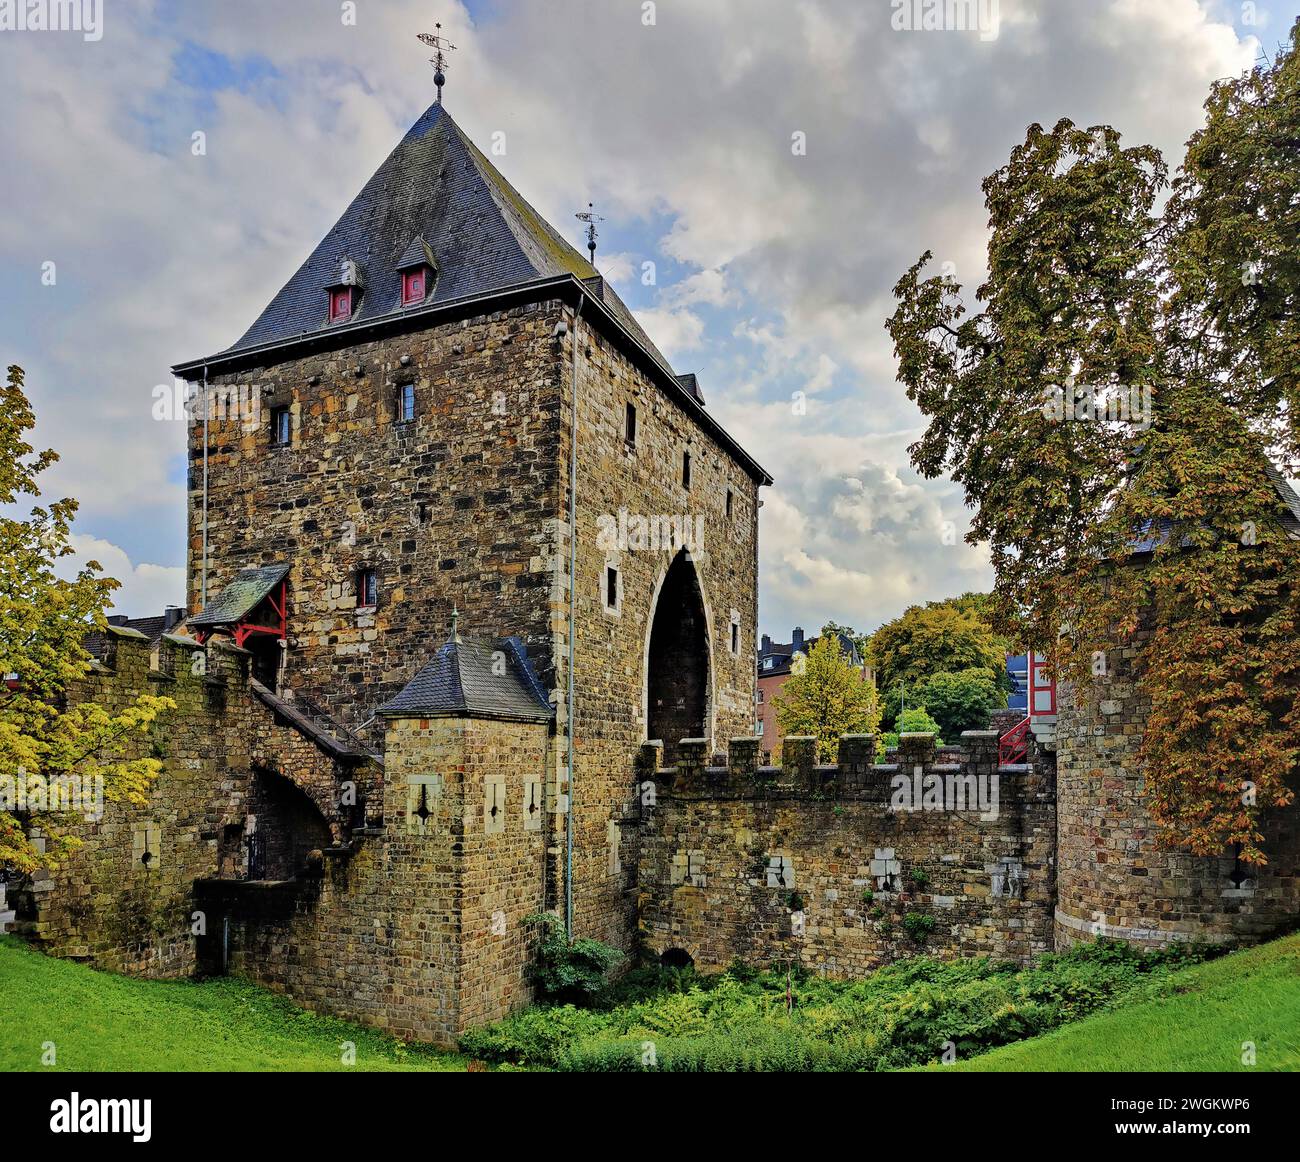 Ponttor, gate of the city wall of Aachen, Germany, North Rhine-Westphalia, Aix-la-Chapelle Stock Photo